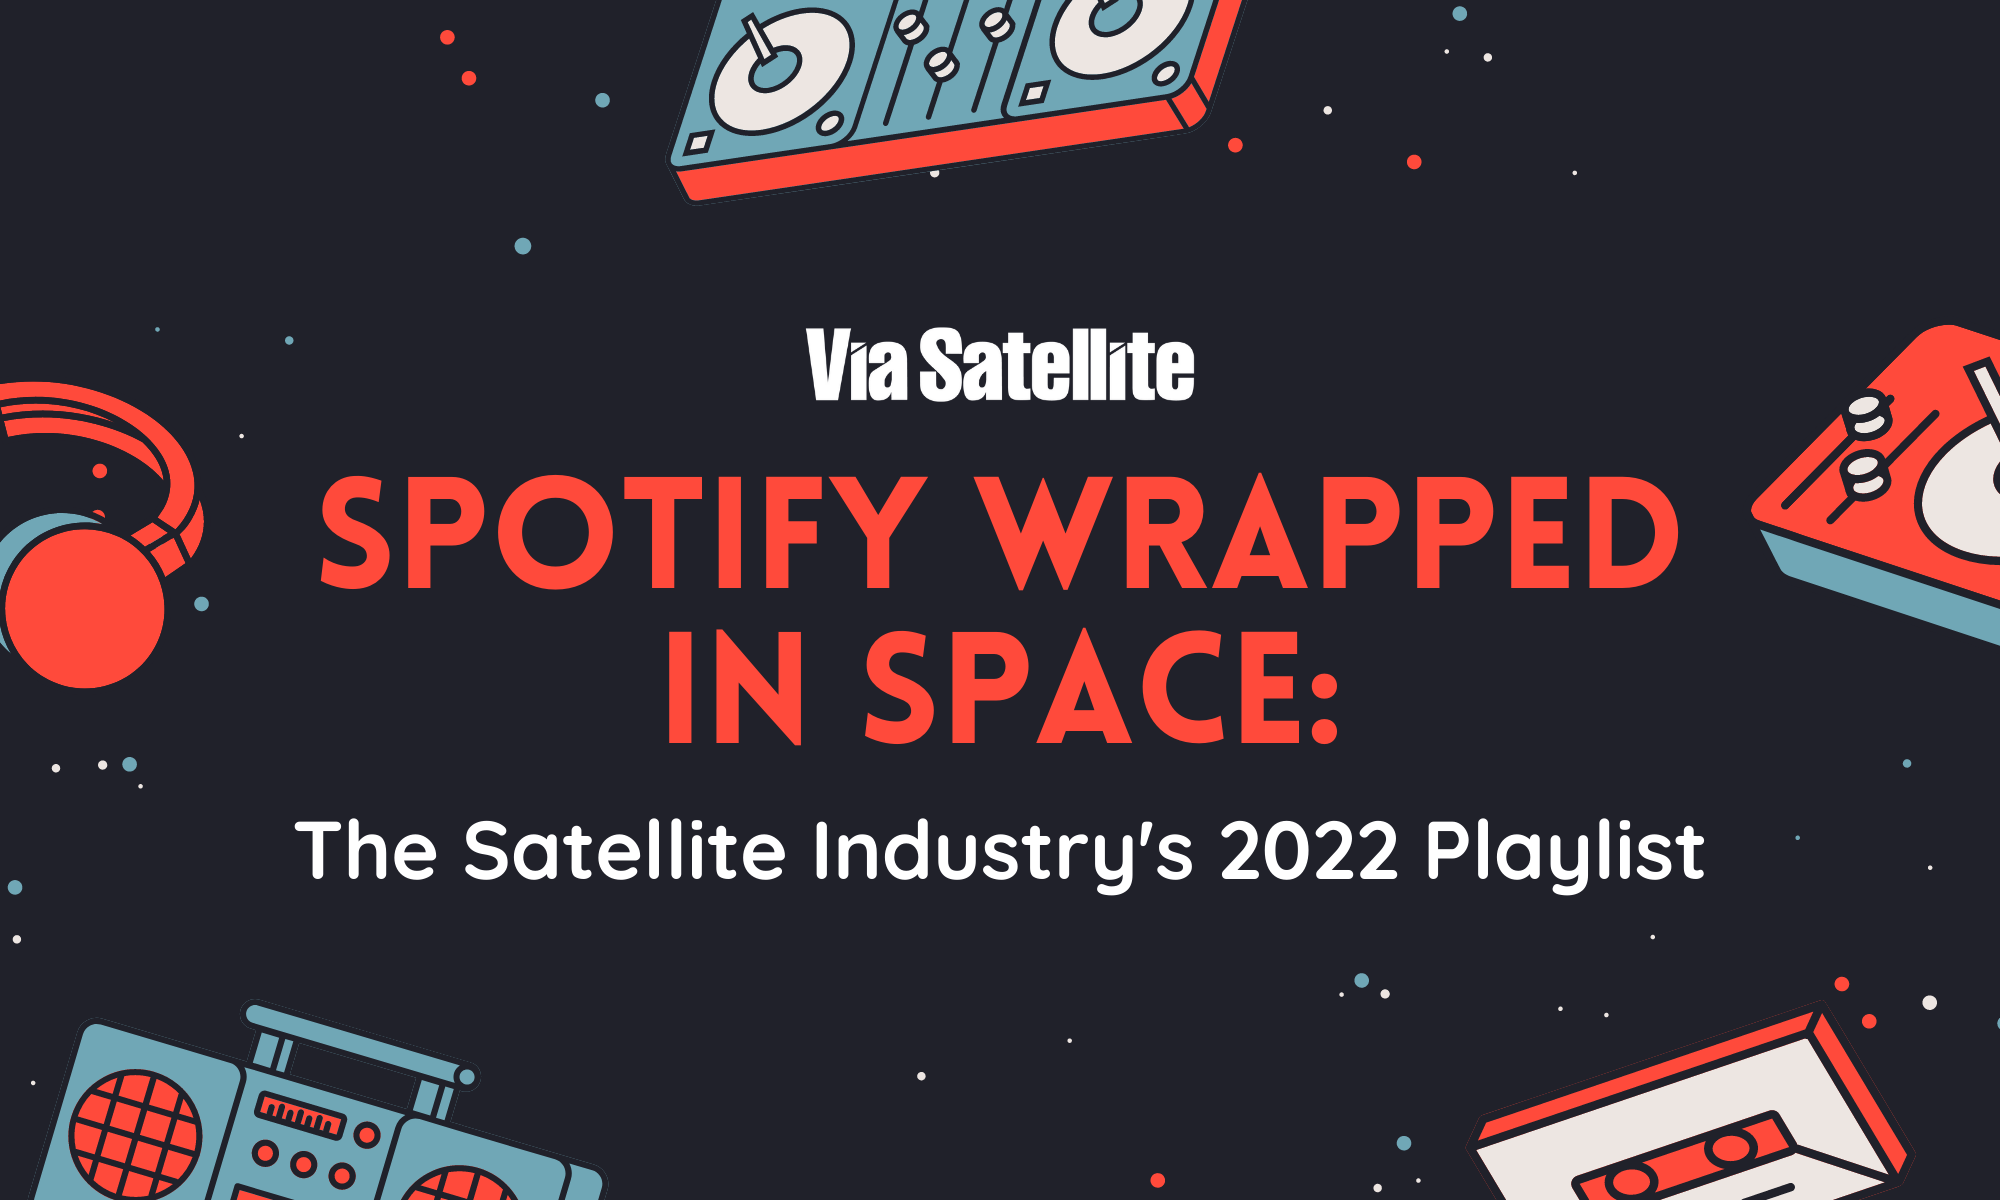 Spotify Wrapped in Space.